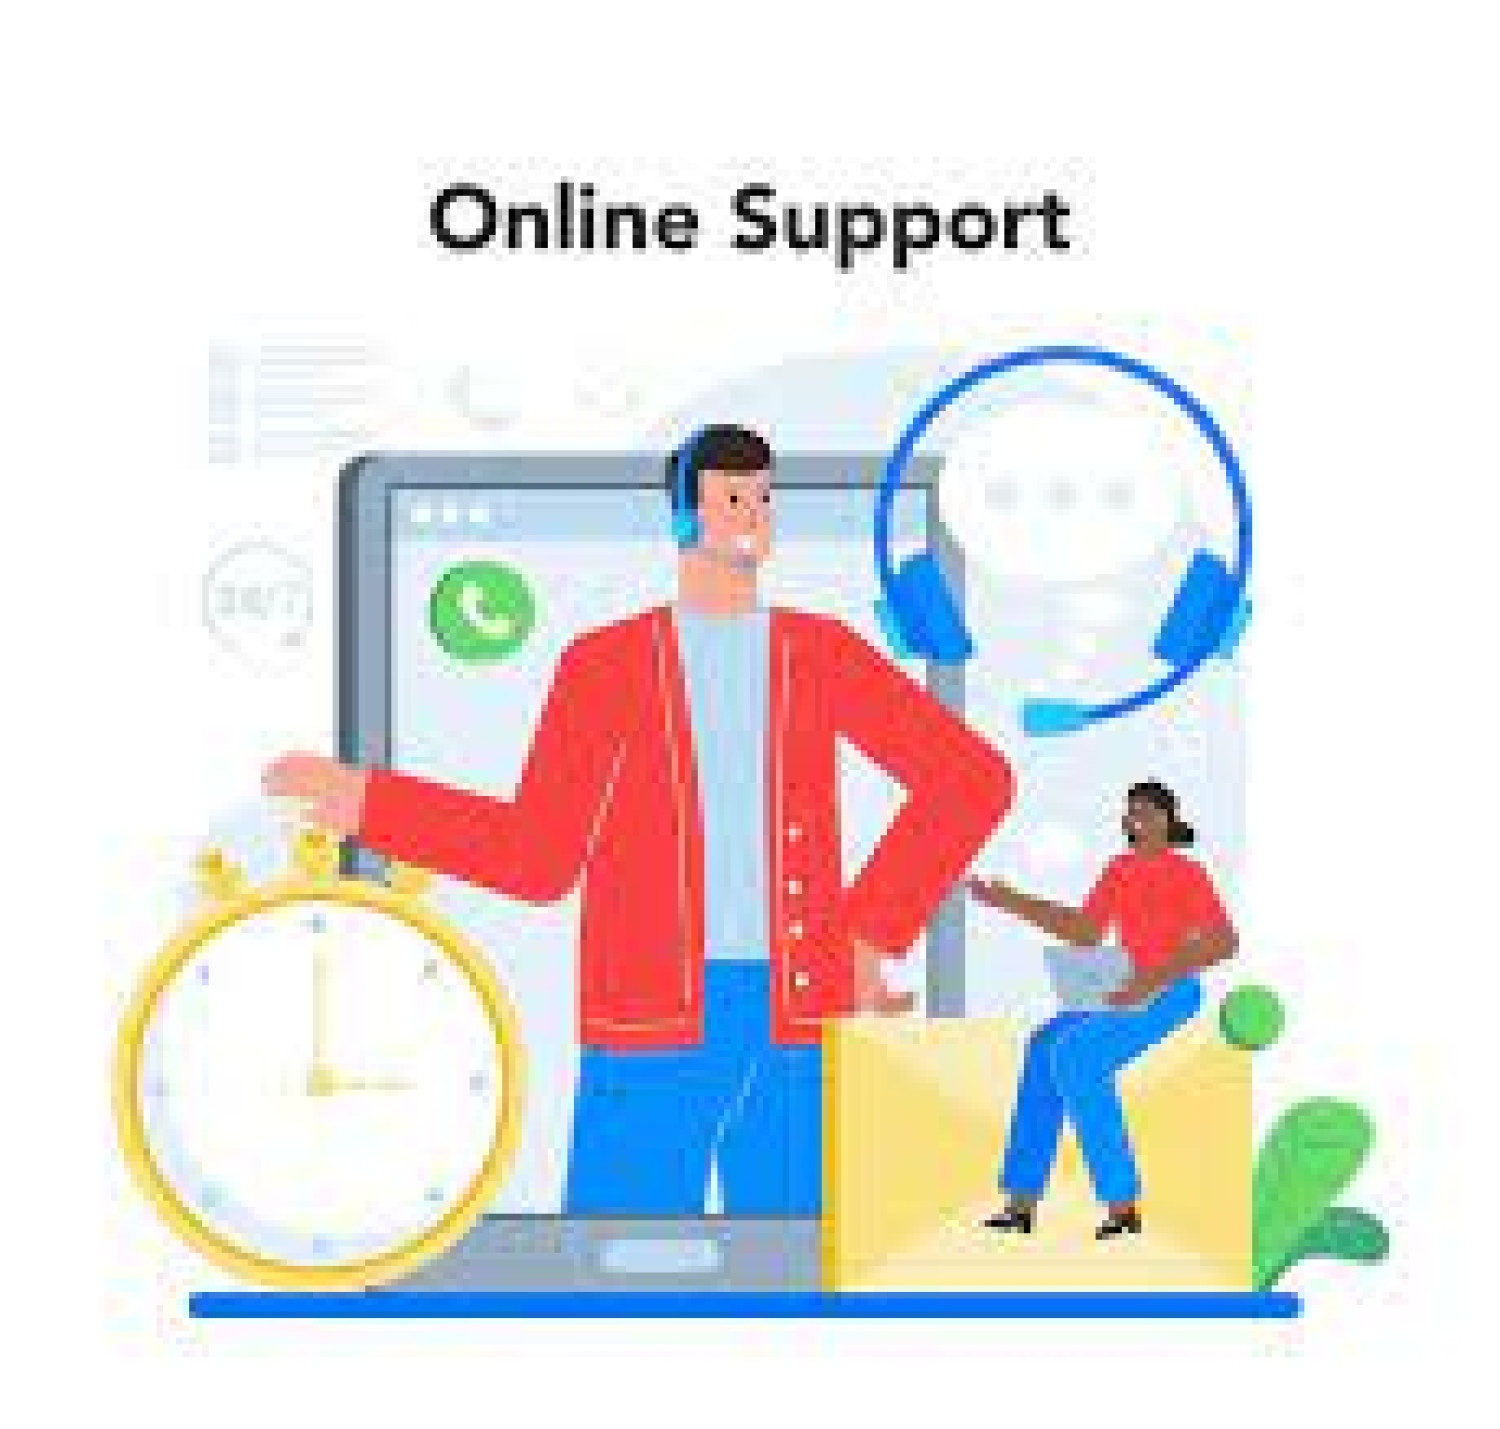 I will provide technical support for you or your customers